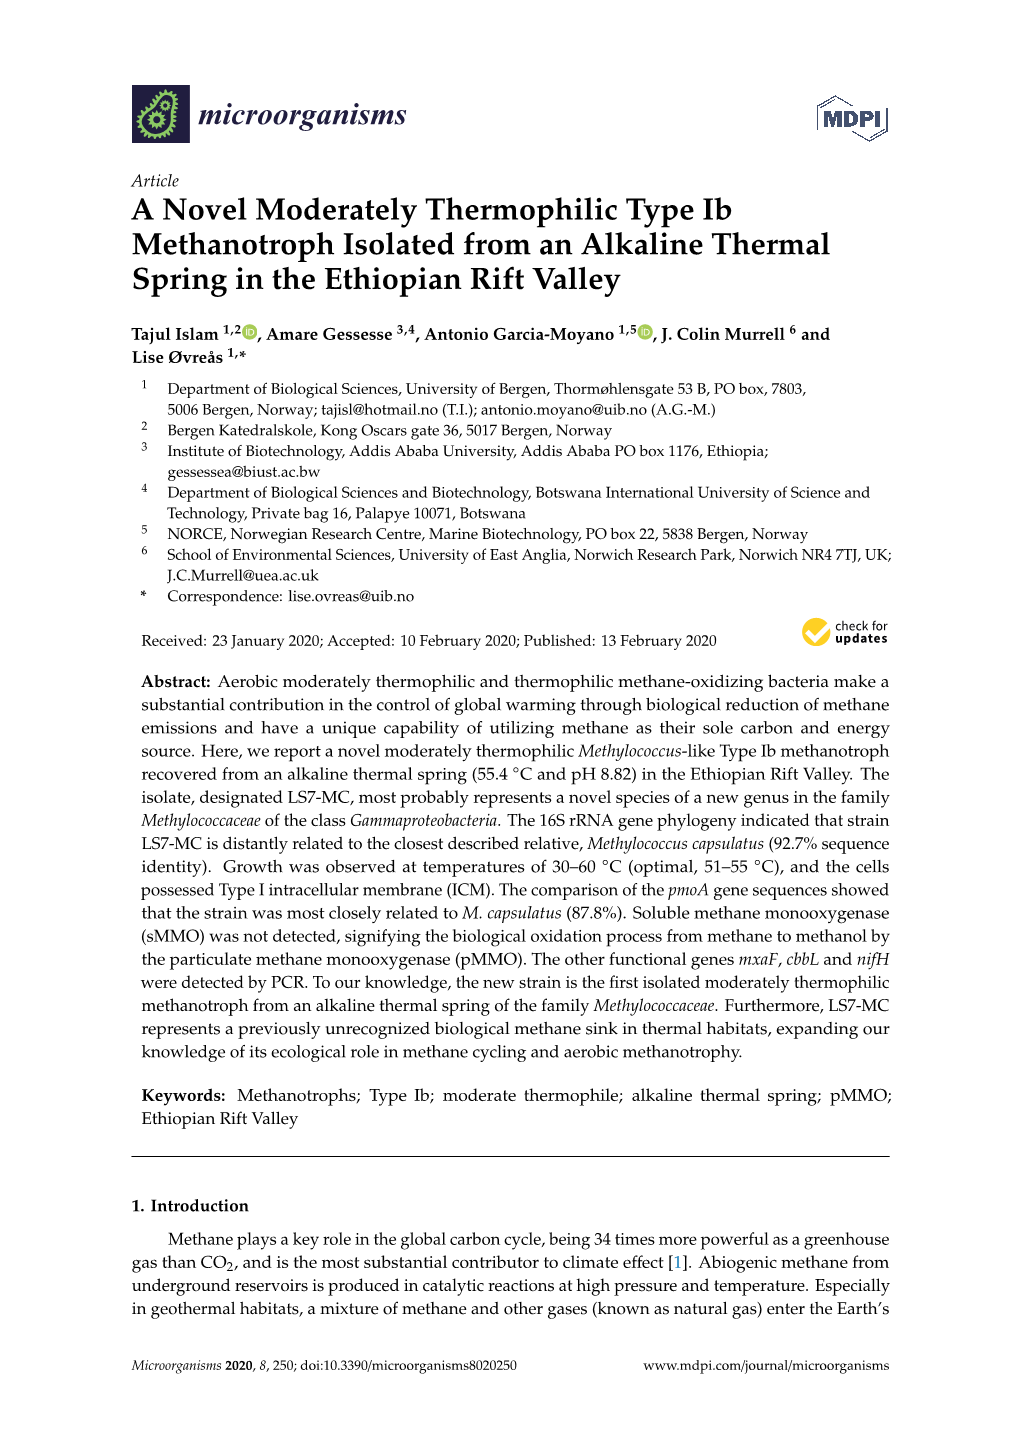 A Novel Moderately Thermophilic Type Ib Methanotroph Isolated from an Alkaline Thermal Spring in the Ethiopian Rift Valley